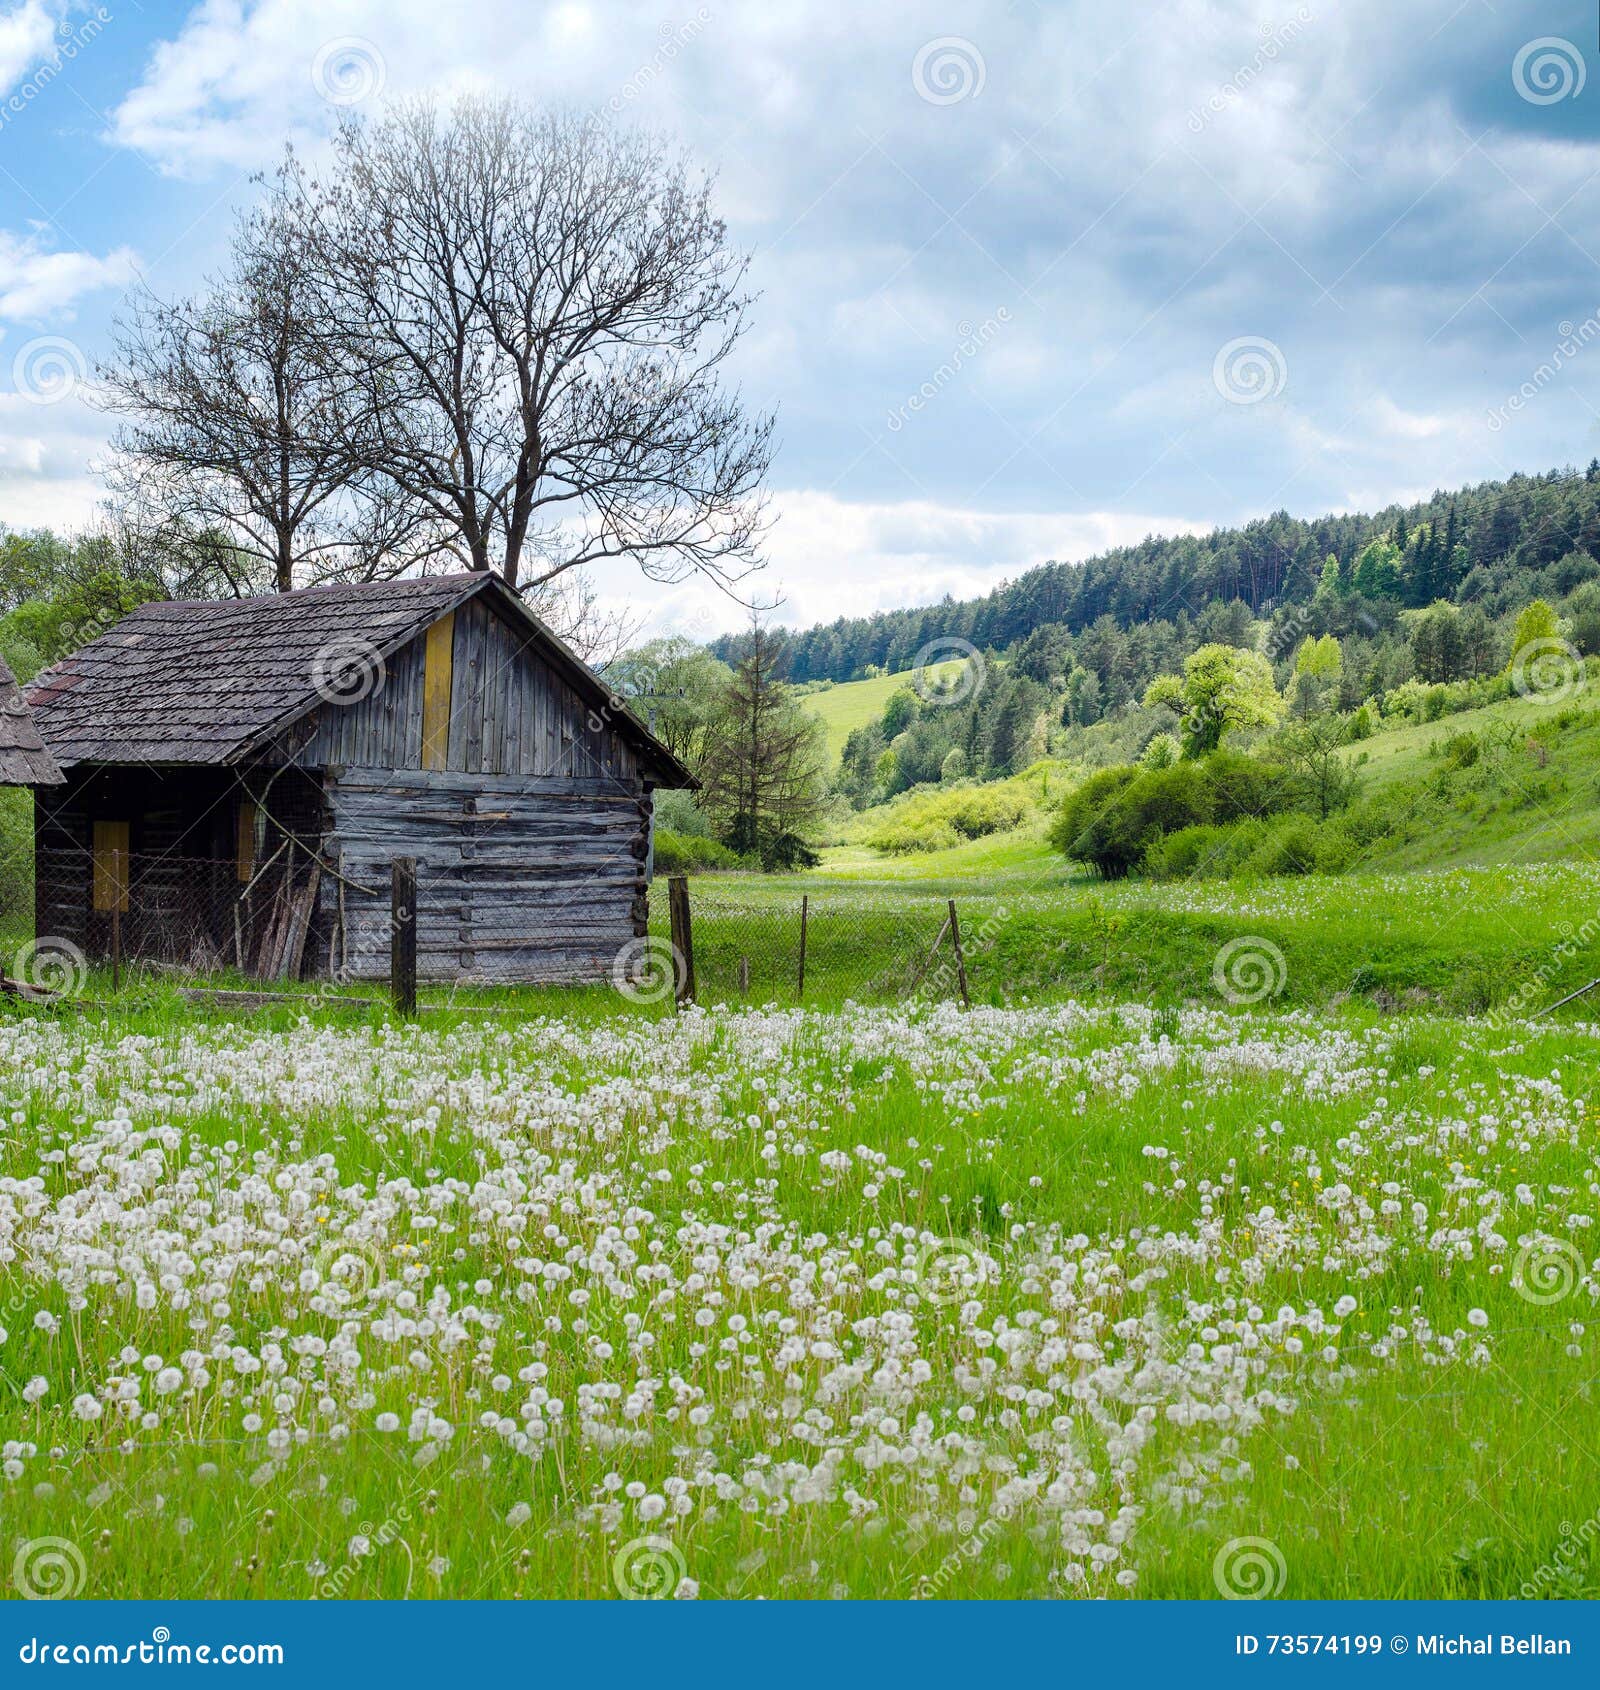 Old Wooden House in Meadow. Rural Landscape. Stock Image - Image of ...